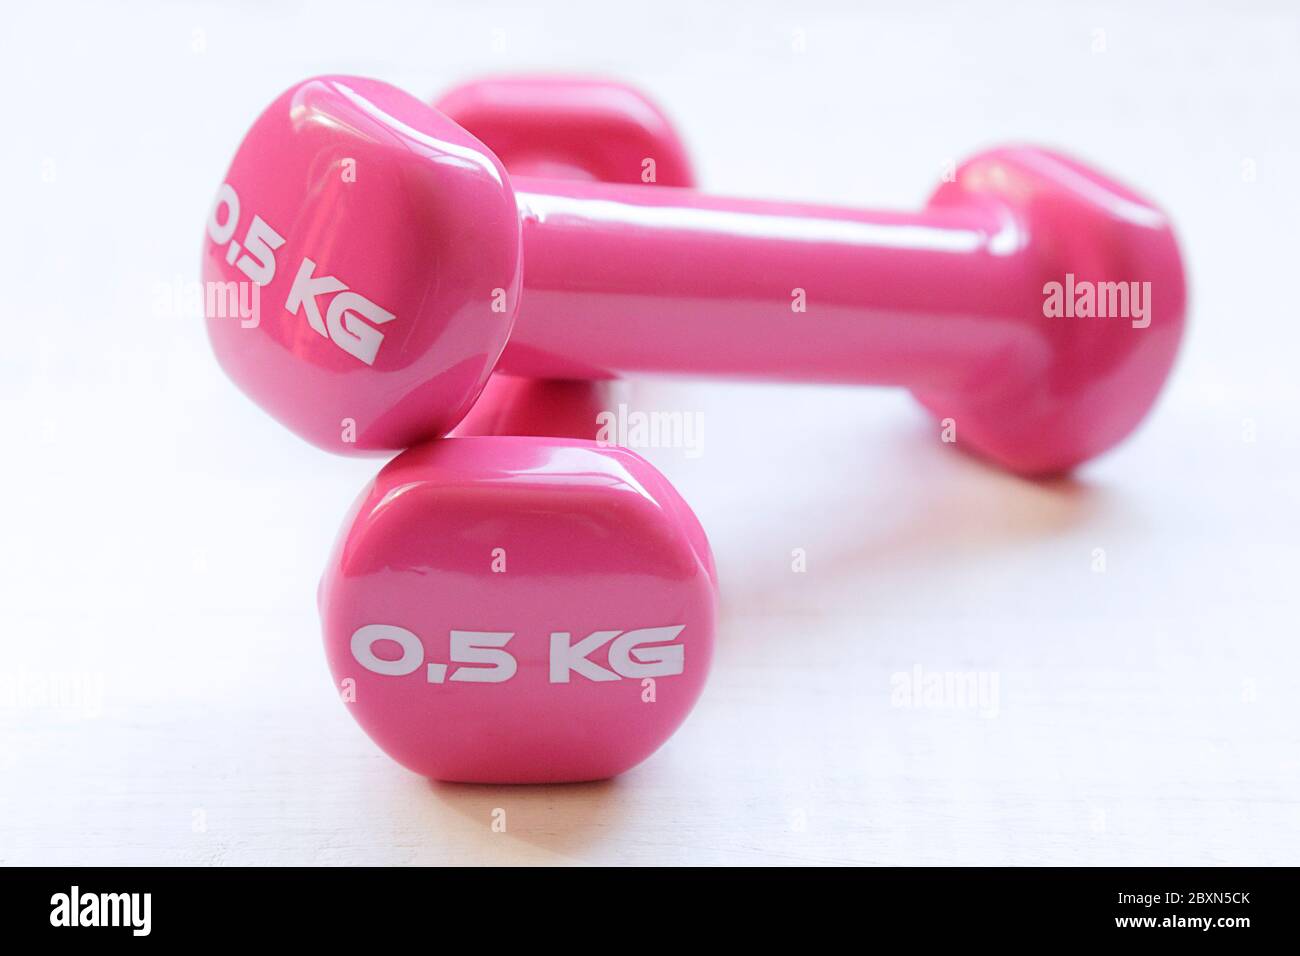 Pink dumbbells for fitness weighing 0.5 kg over a white wooden table Stock Photo